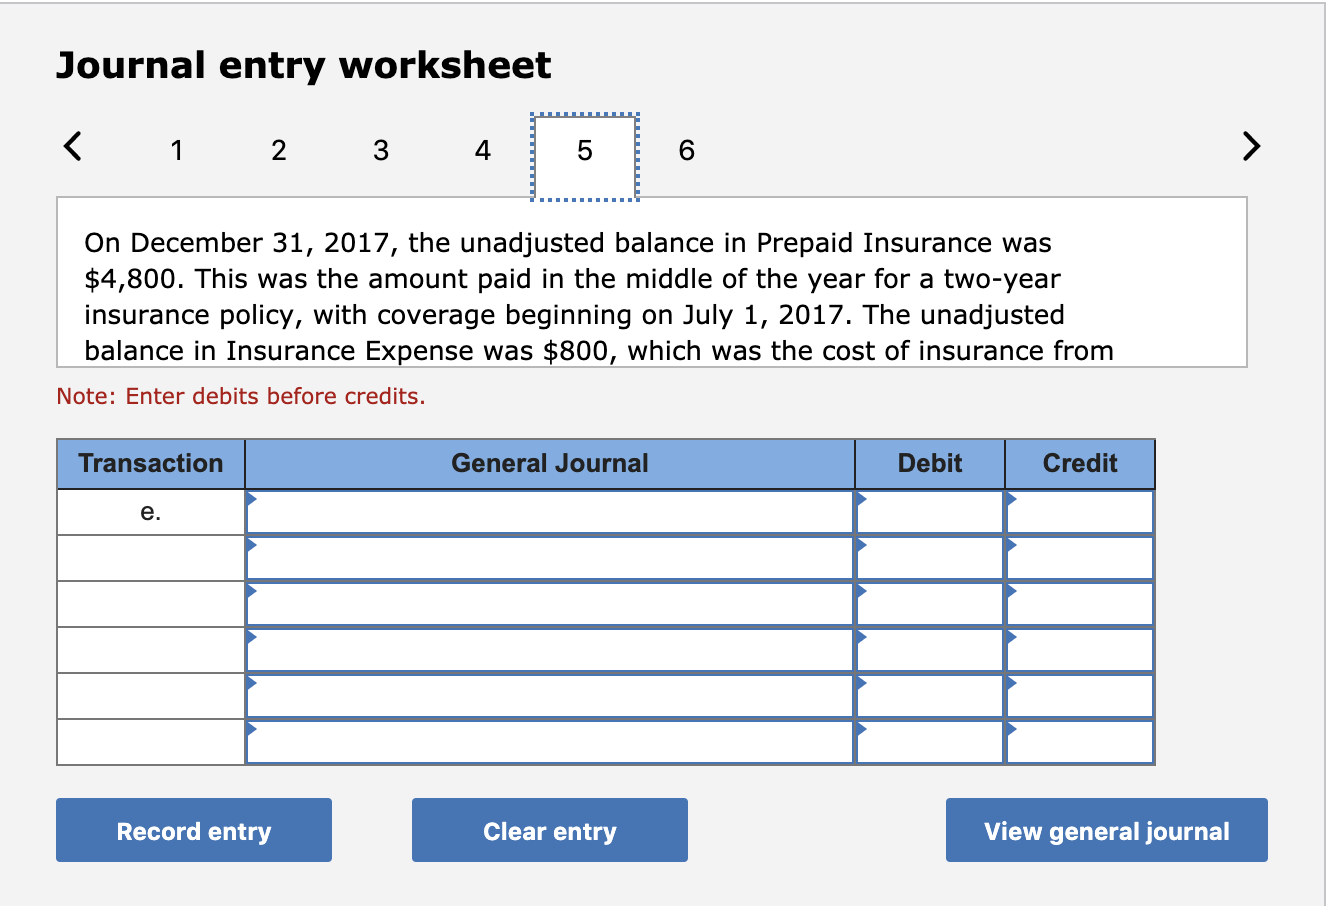 Journal entry worksheet < 1 2 3 4 5 ............ on december 31, 2017, the unadjusted balance in prepaid insurance was $4,800